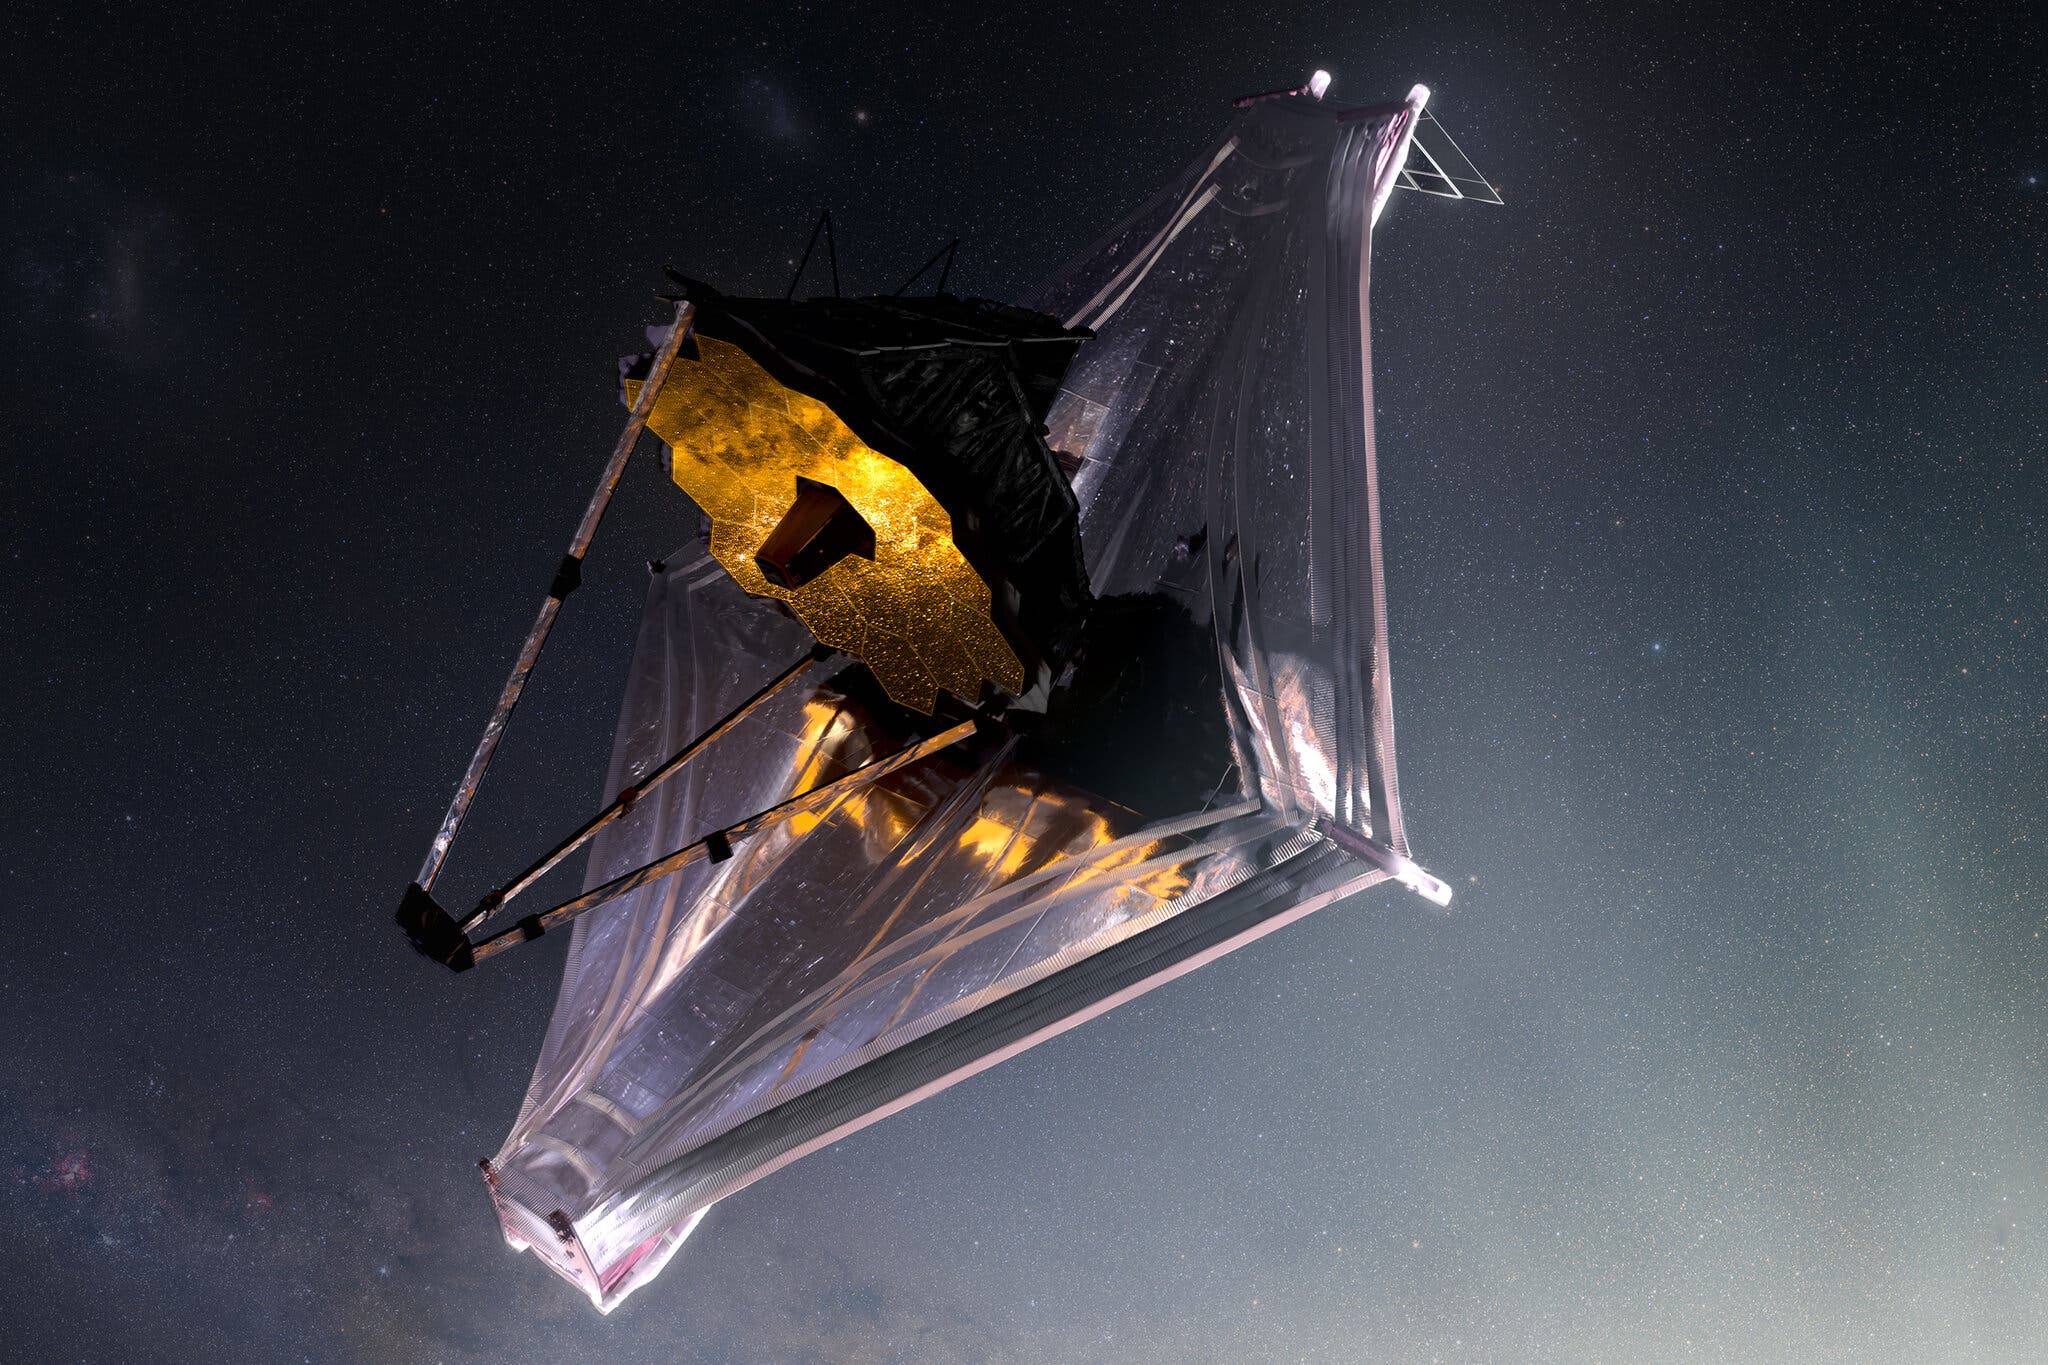 Powerful NASA James Webb Space Telescope Completes Complex Deployment Sequence, Continues Journey To Uncover Mysteries Of The Universe